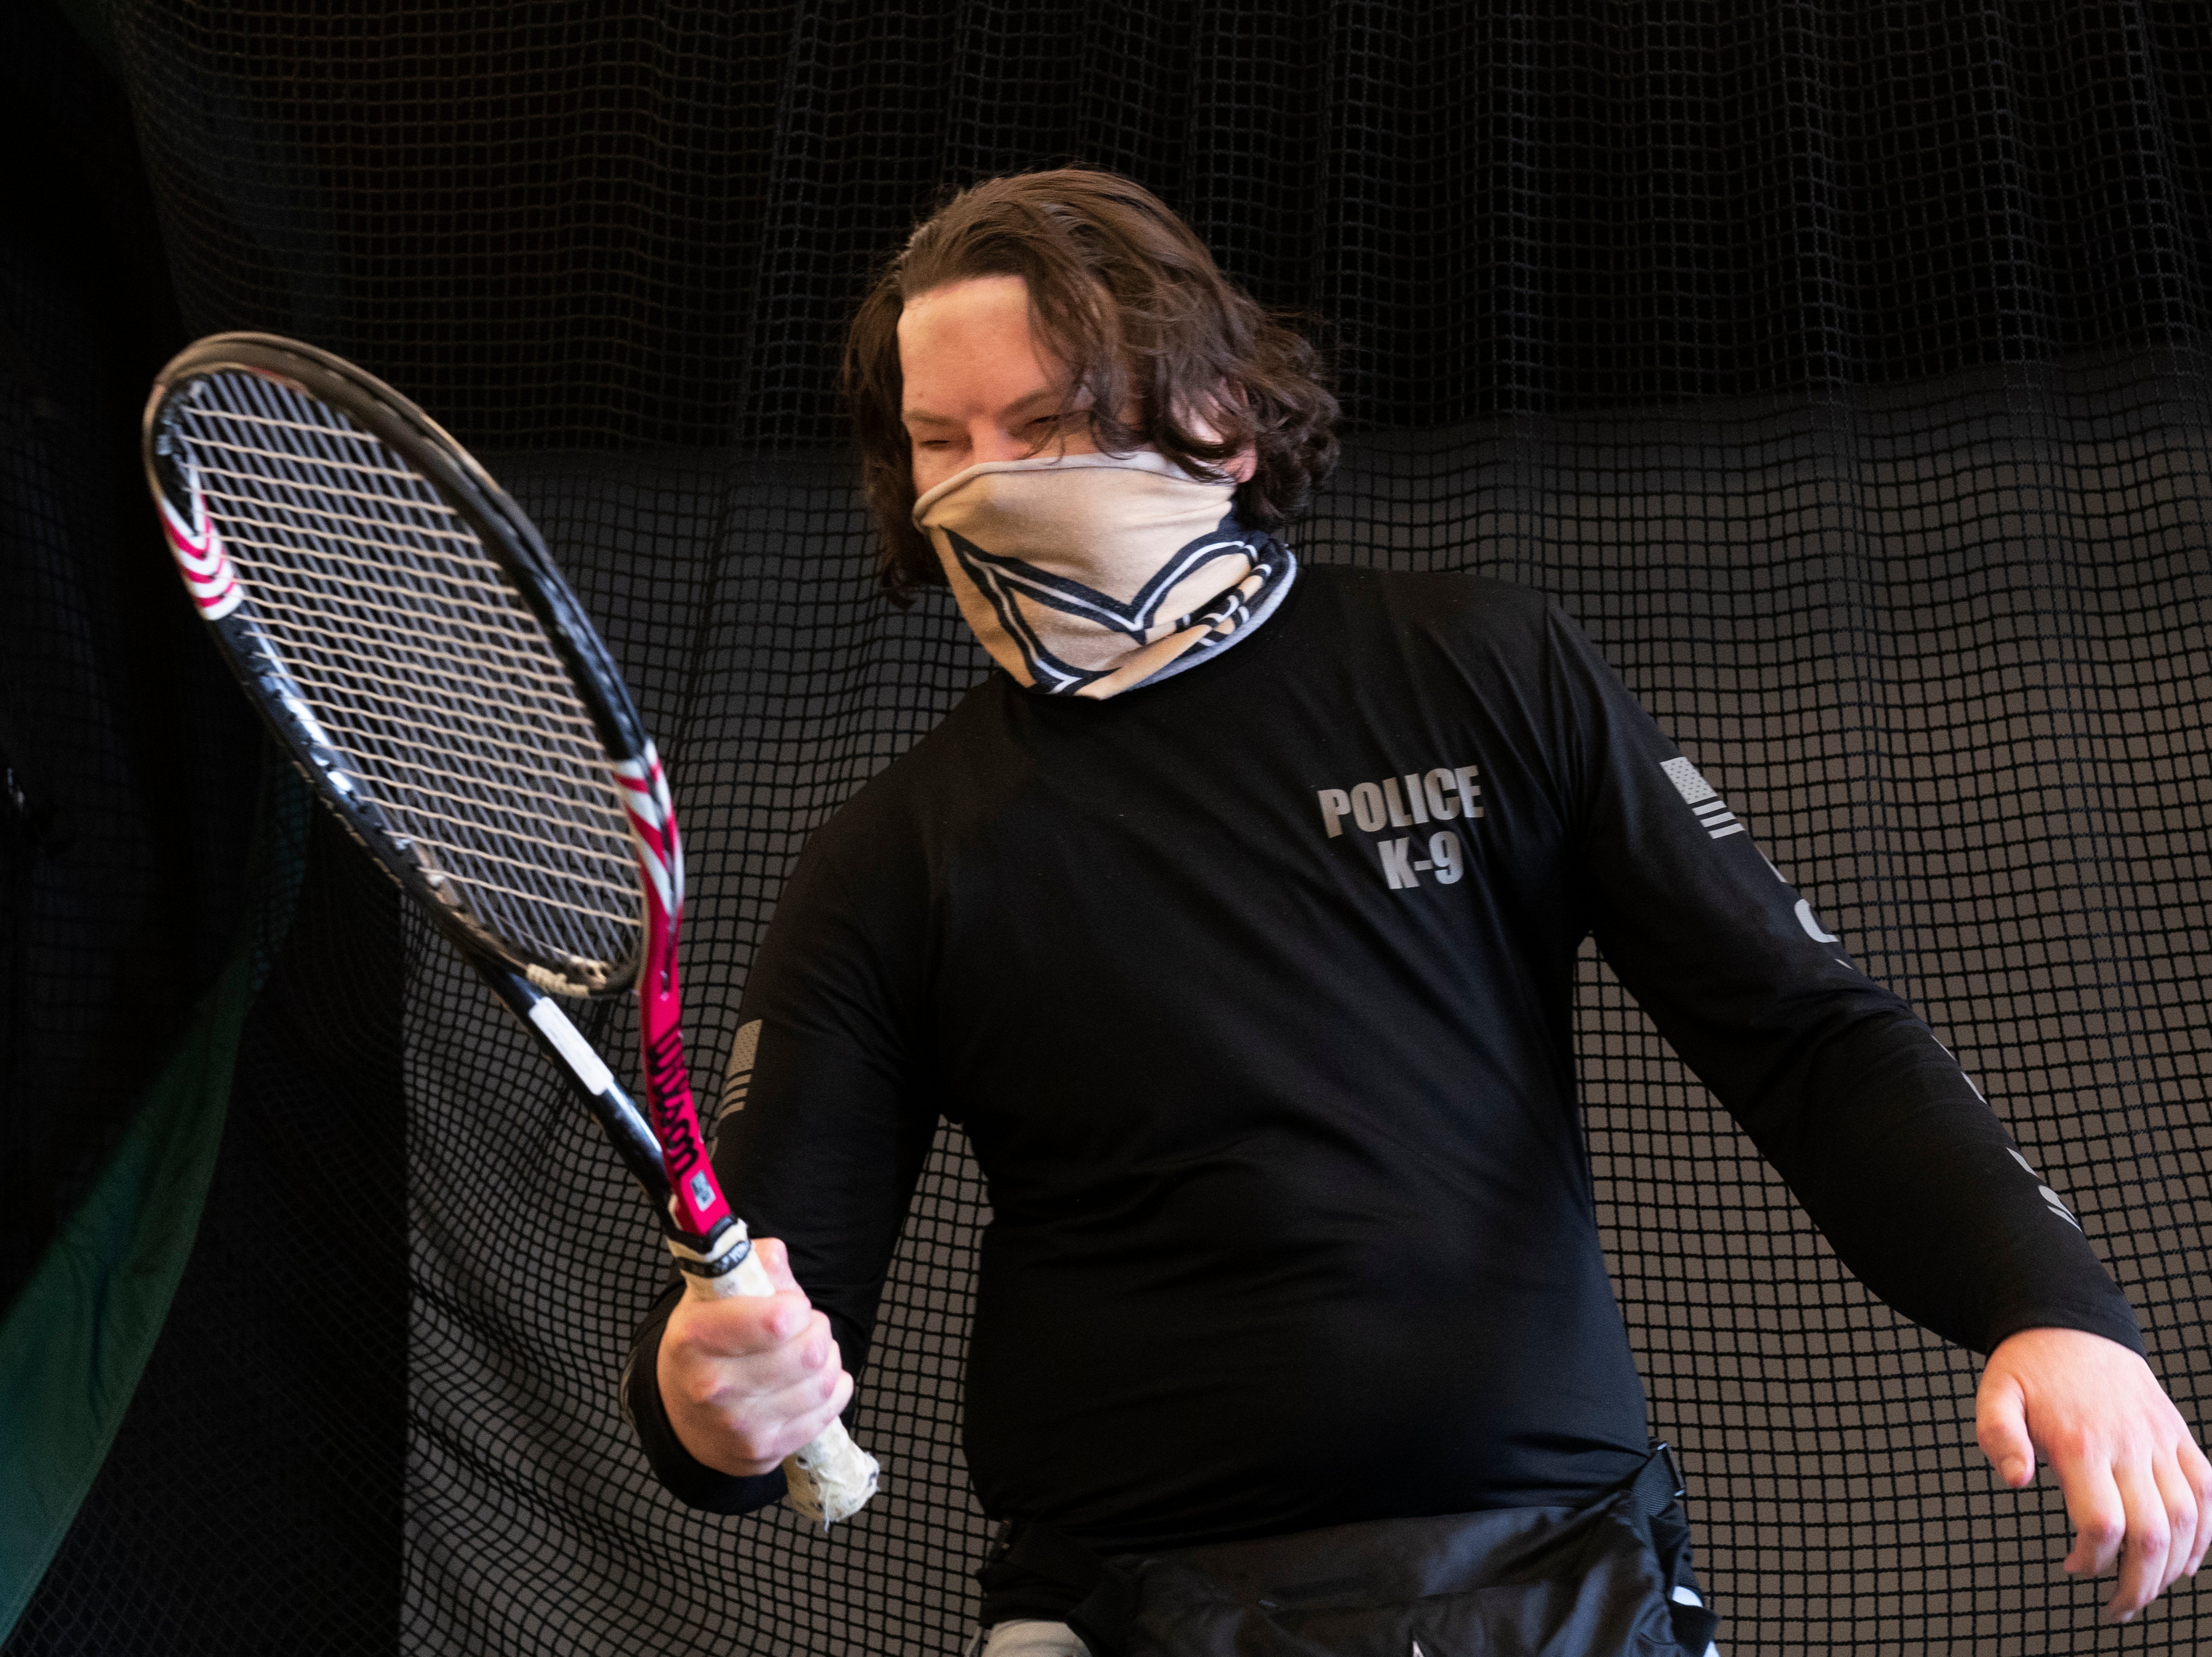 Joe DiMeo holds a tennis racket as he works in a physical therapy session